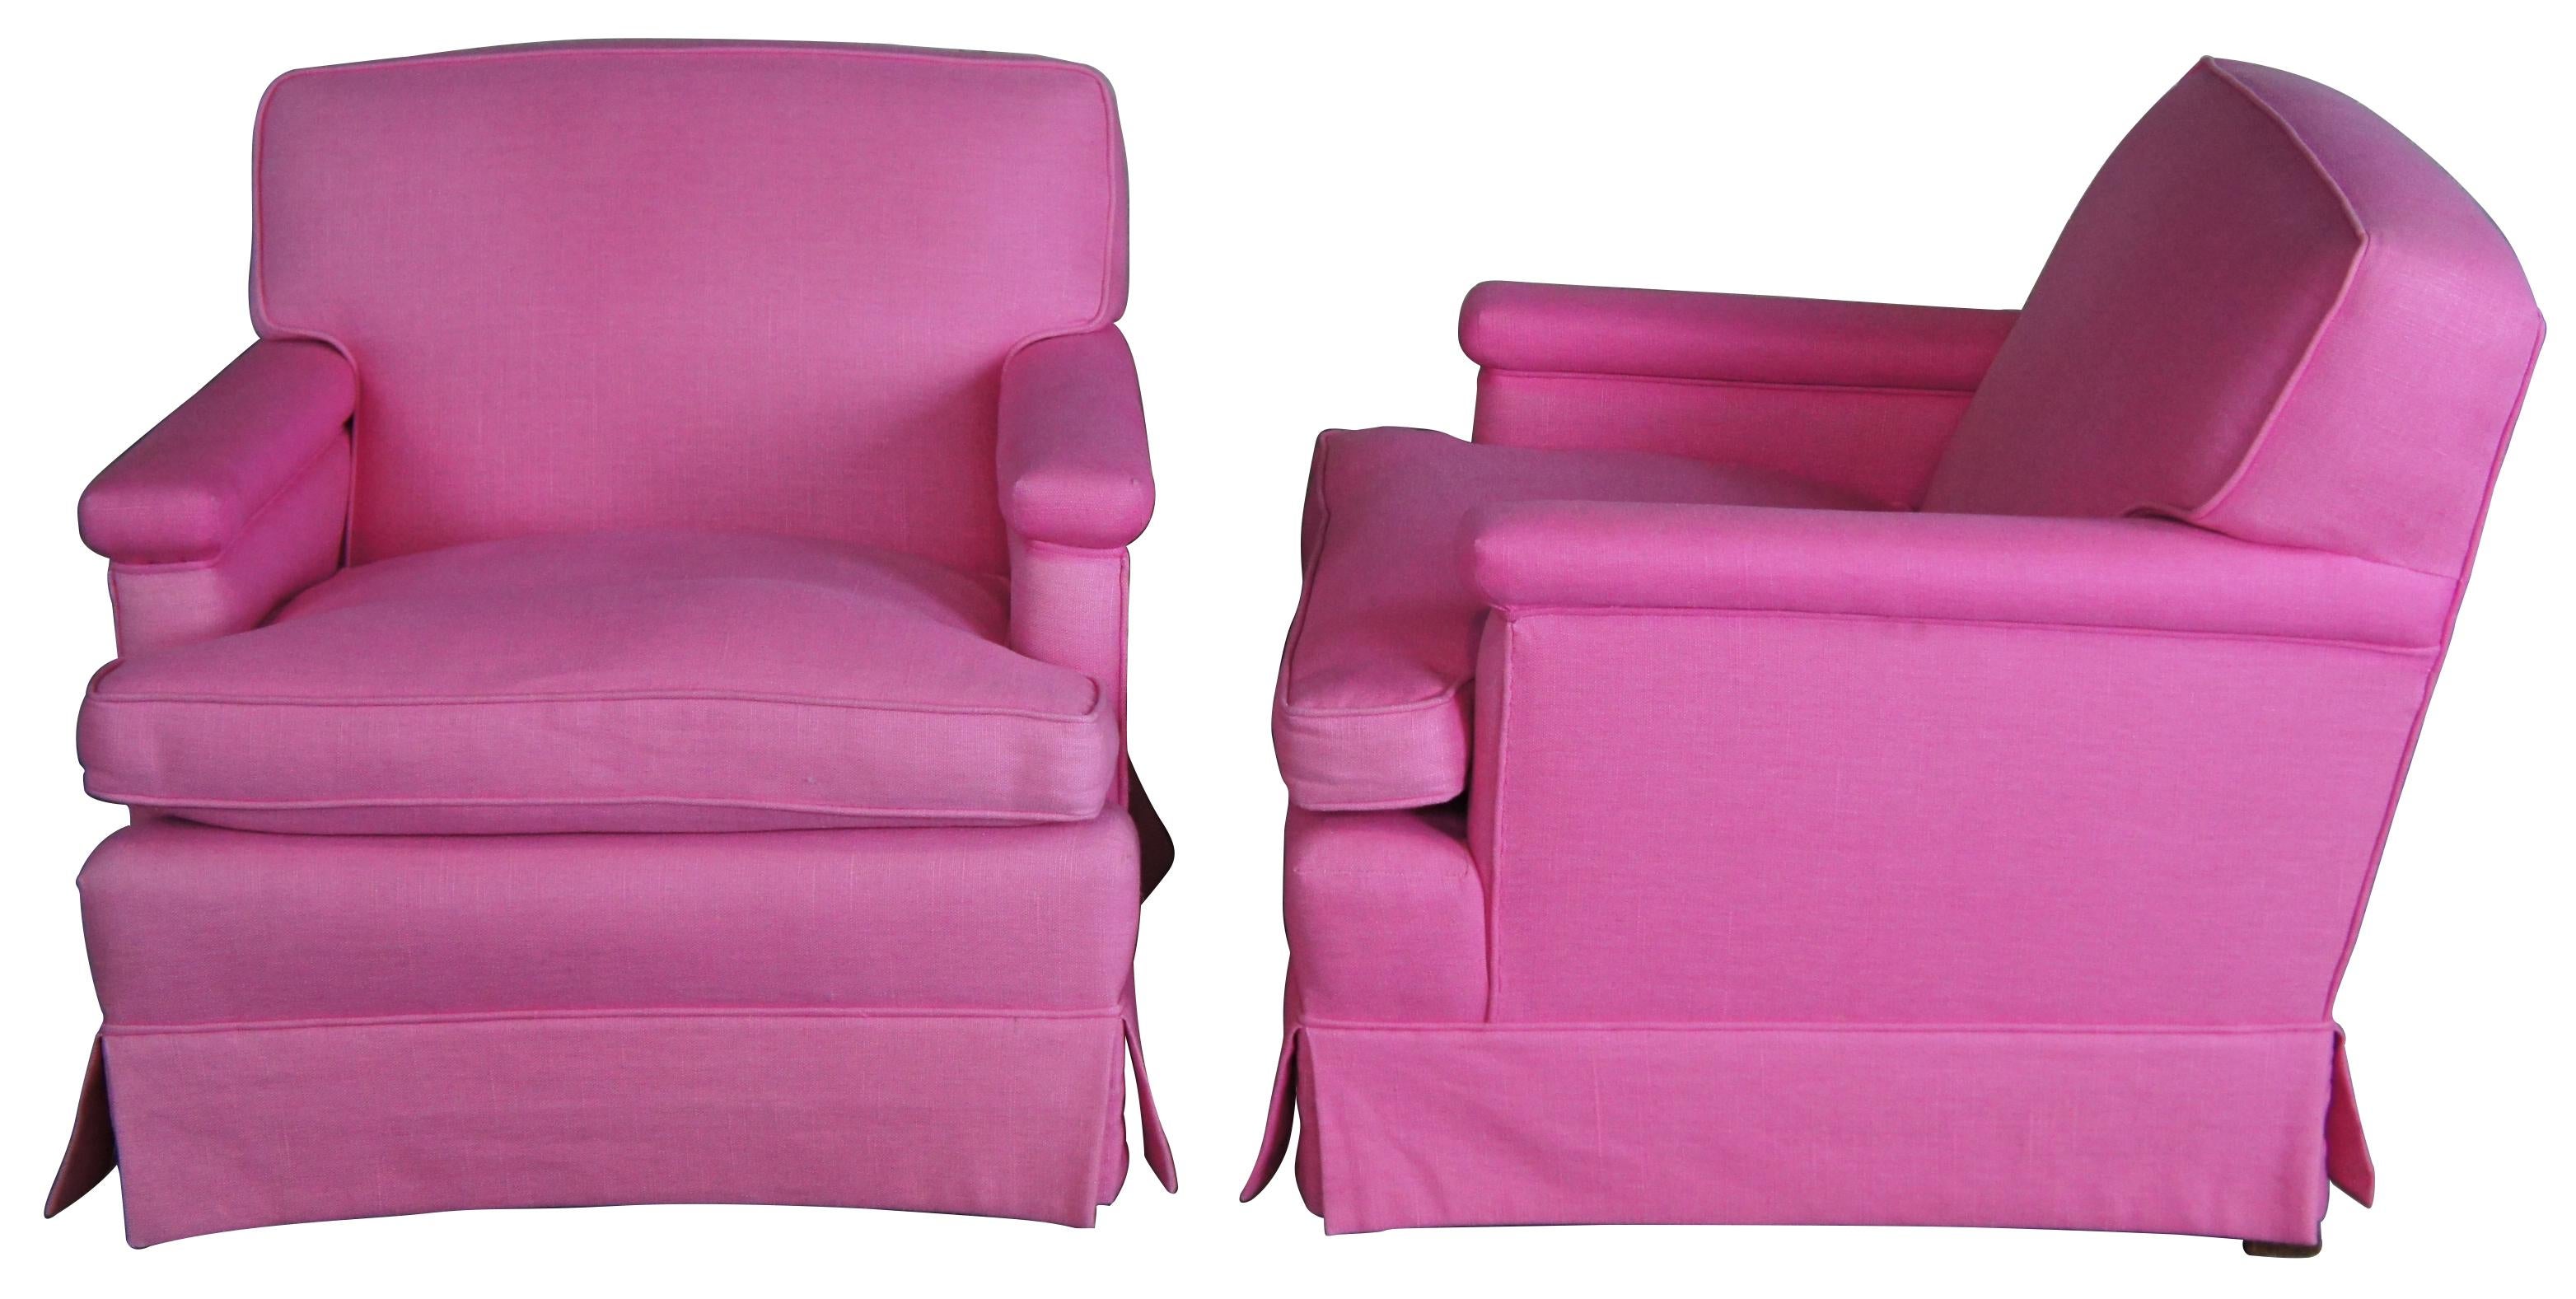 Traditional pair of pink upholstered chairs and ottoman. Circa 1970s. Square form with lounging back over walnut legs. 

Chairs - 30' L x 34